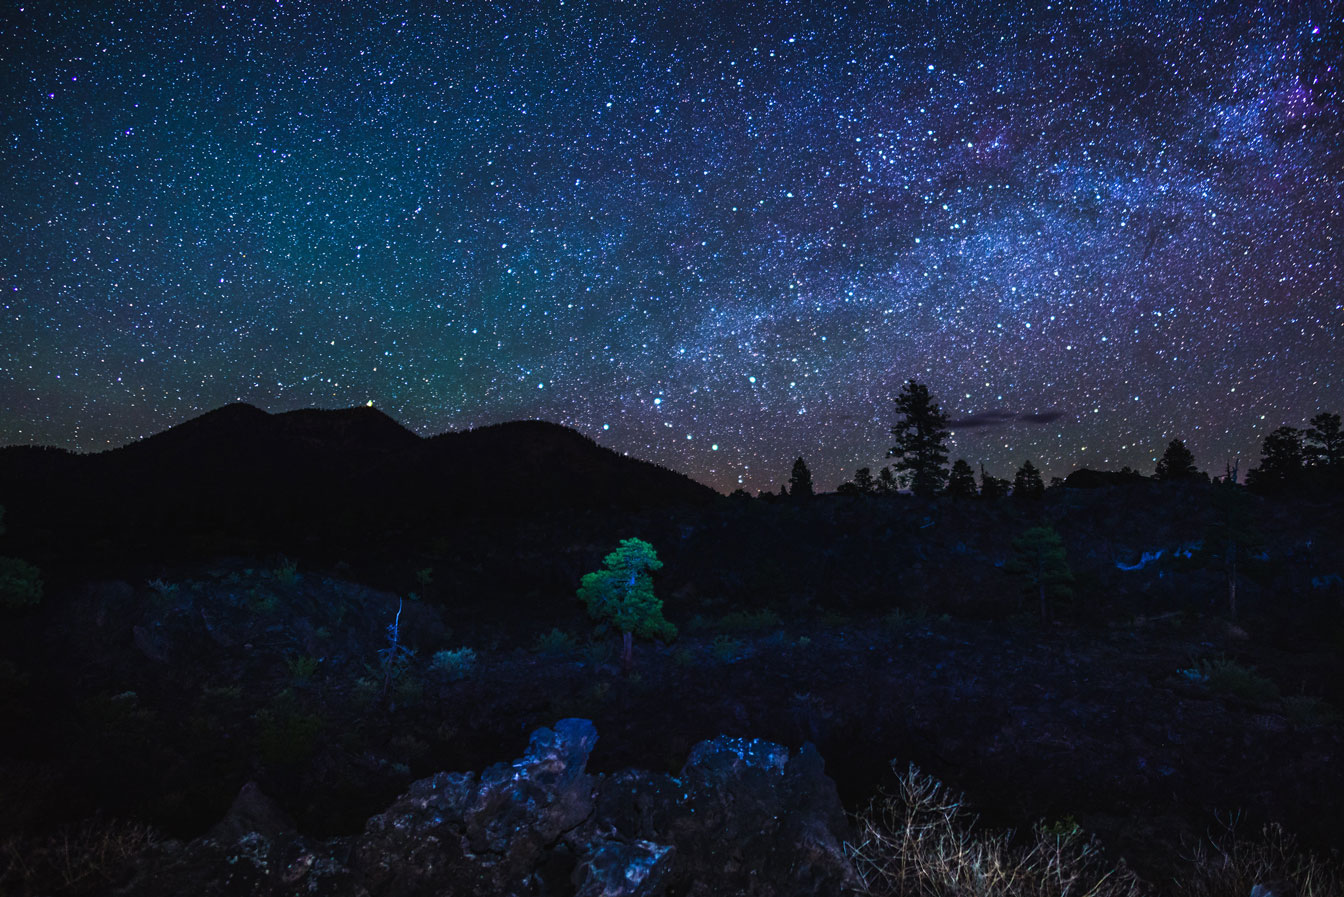 The night sky full of stars with the dark outline of O'Leary Peak at Sunset Crater National Monument